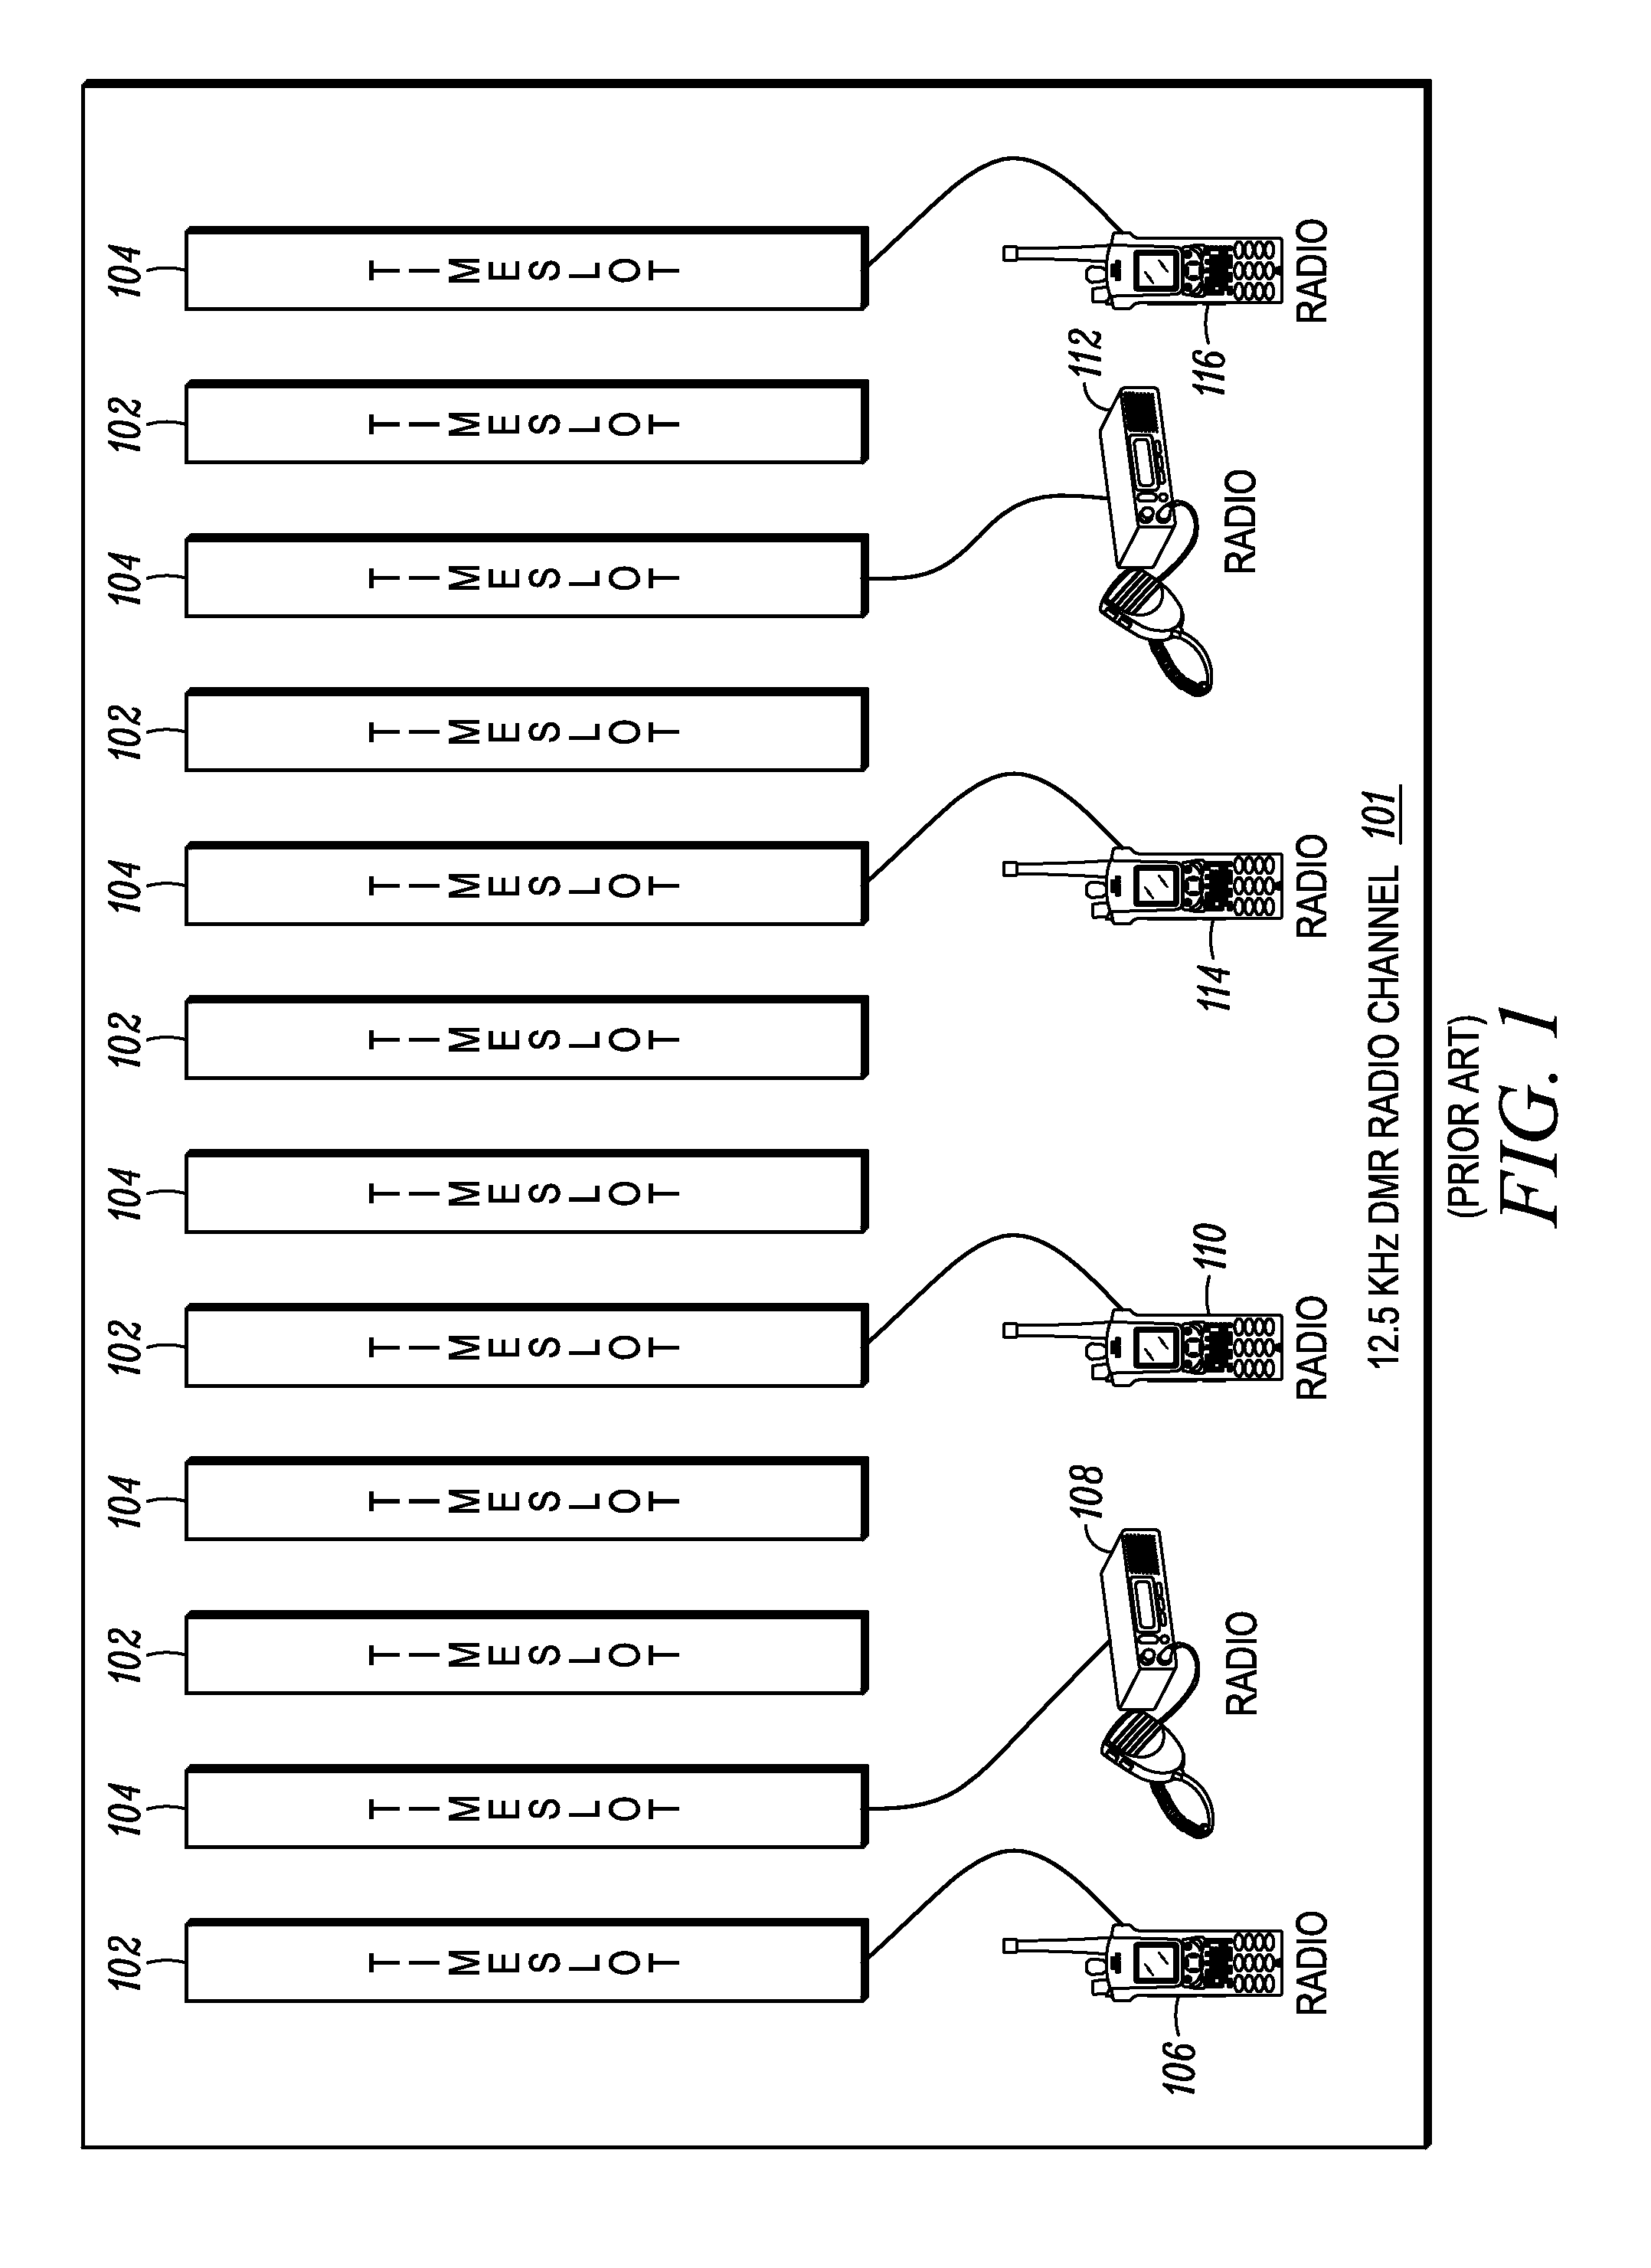 Method and apparatus for tracking a channel timing message and supporting channel scanning in a digital mobile radio system